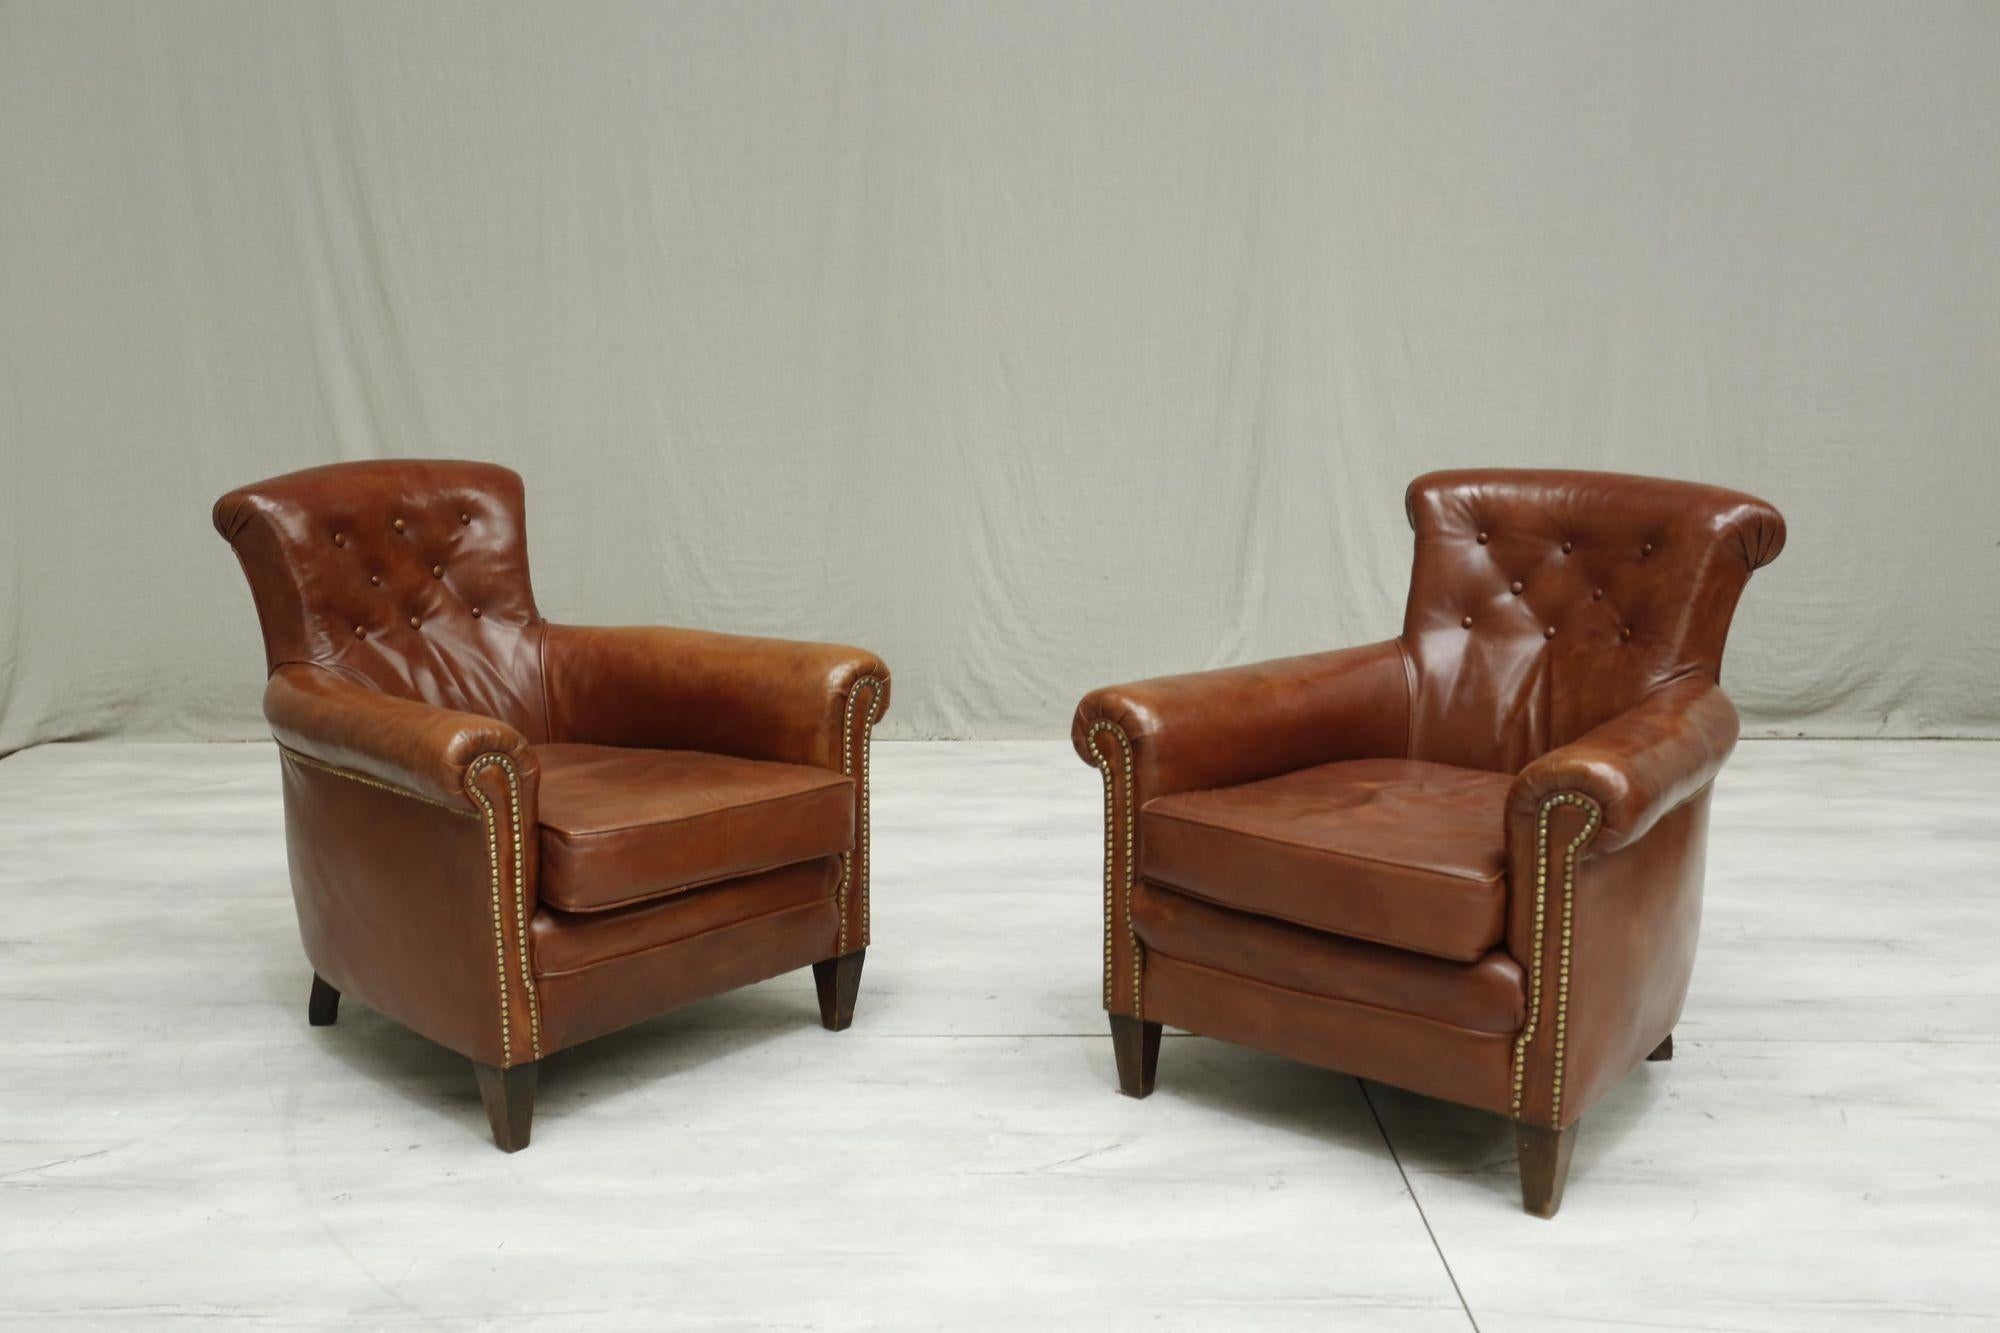 These are a stunning pair of early 20th century leather armchairs. Great original patinated leather waxed and treated so that it is in stunning condition. The depth of seat of these makes very comfy and ideal for everyday use. The design is very